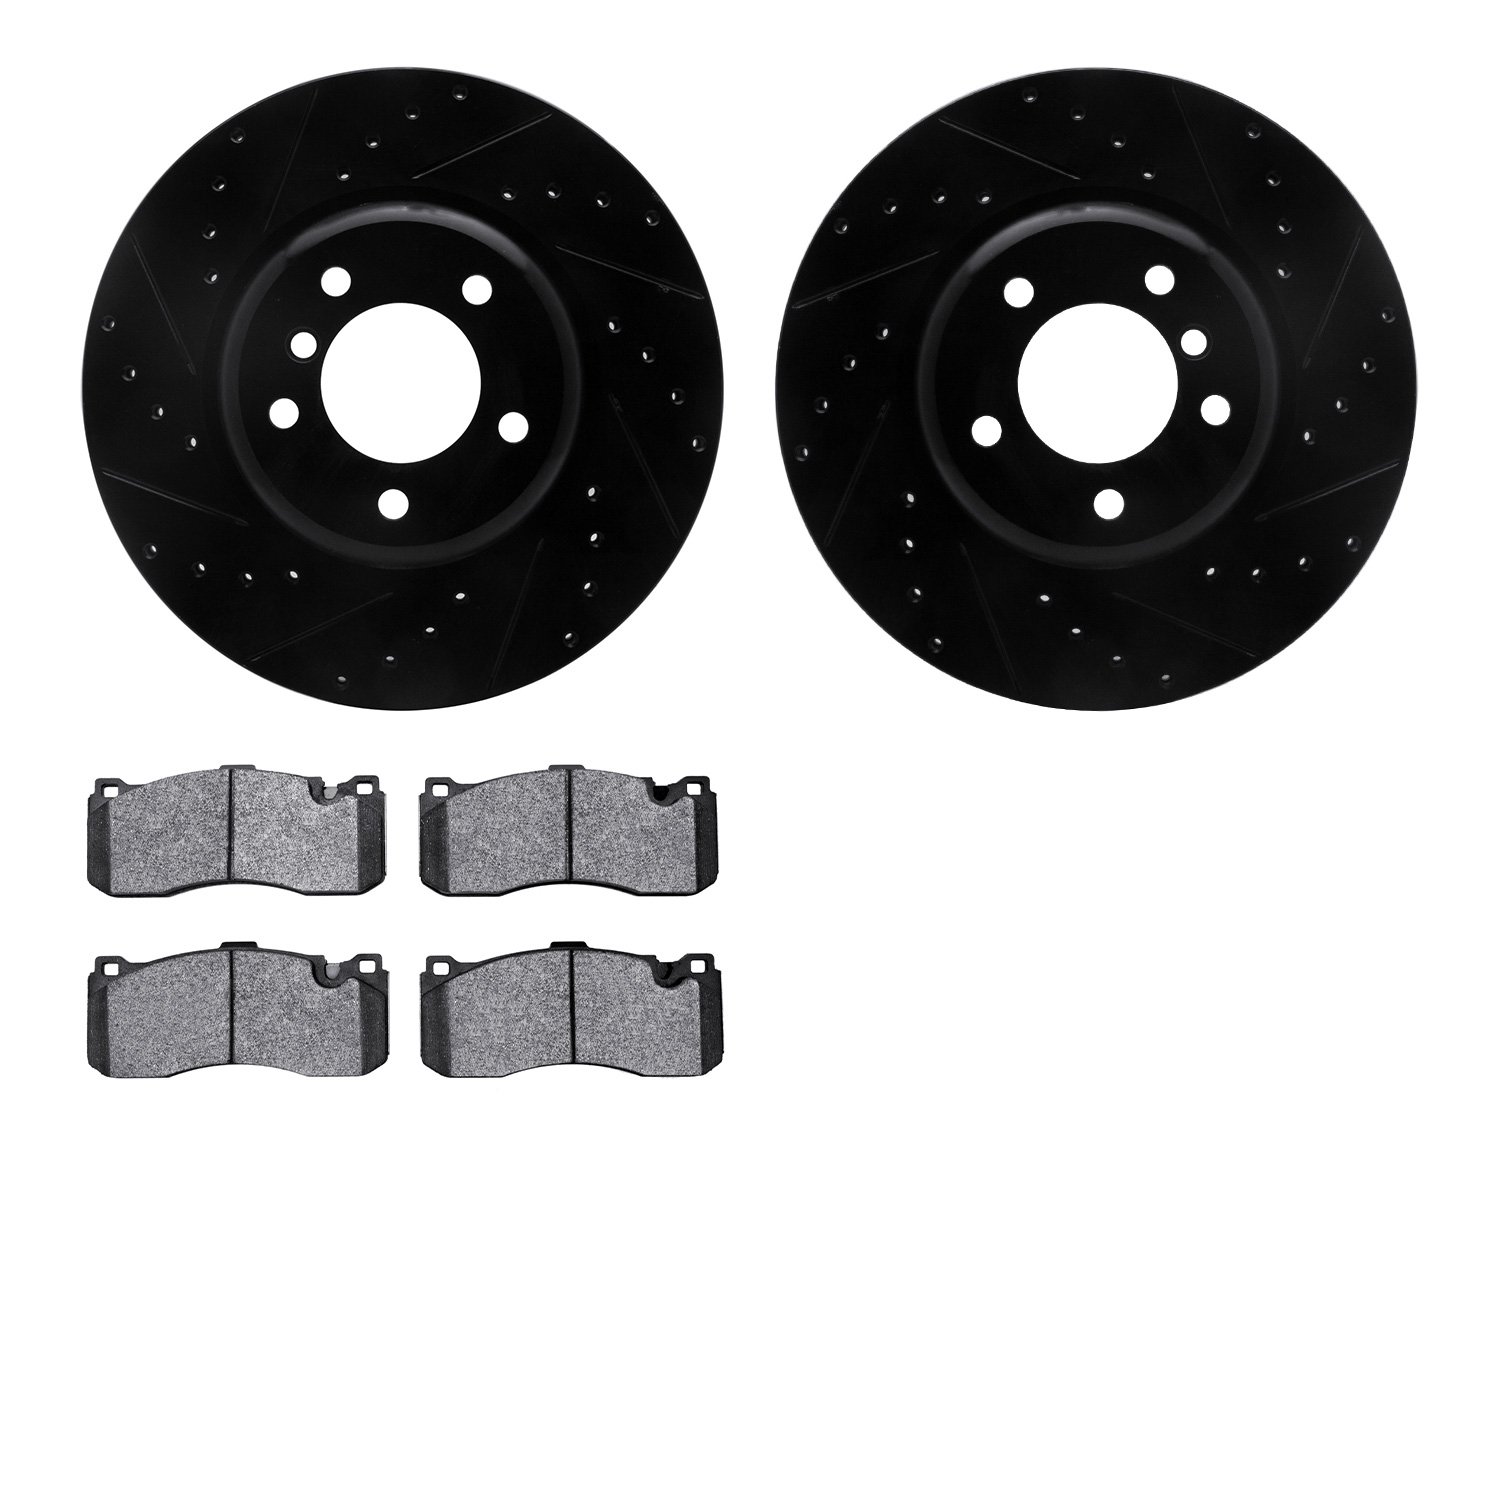 8302-31095 Drilled/Slotted Brake Rotors with 3000-Series Ceramic Brake Pads Kit [Black], 2006-2013 BMW, Position: Front